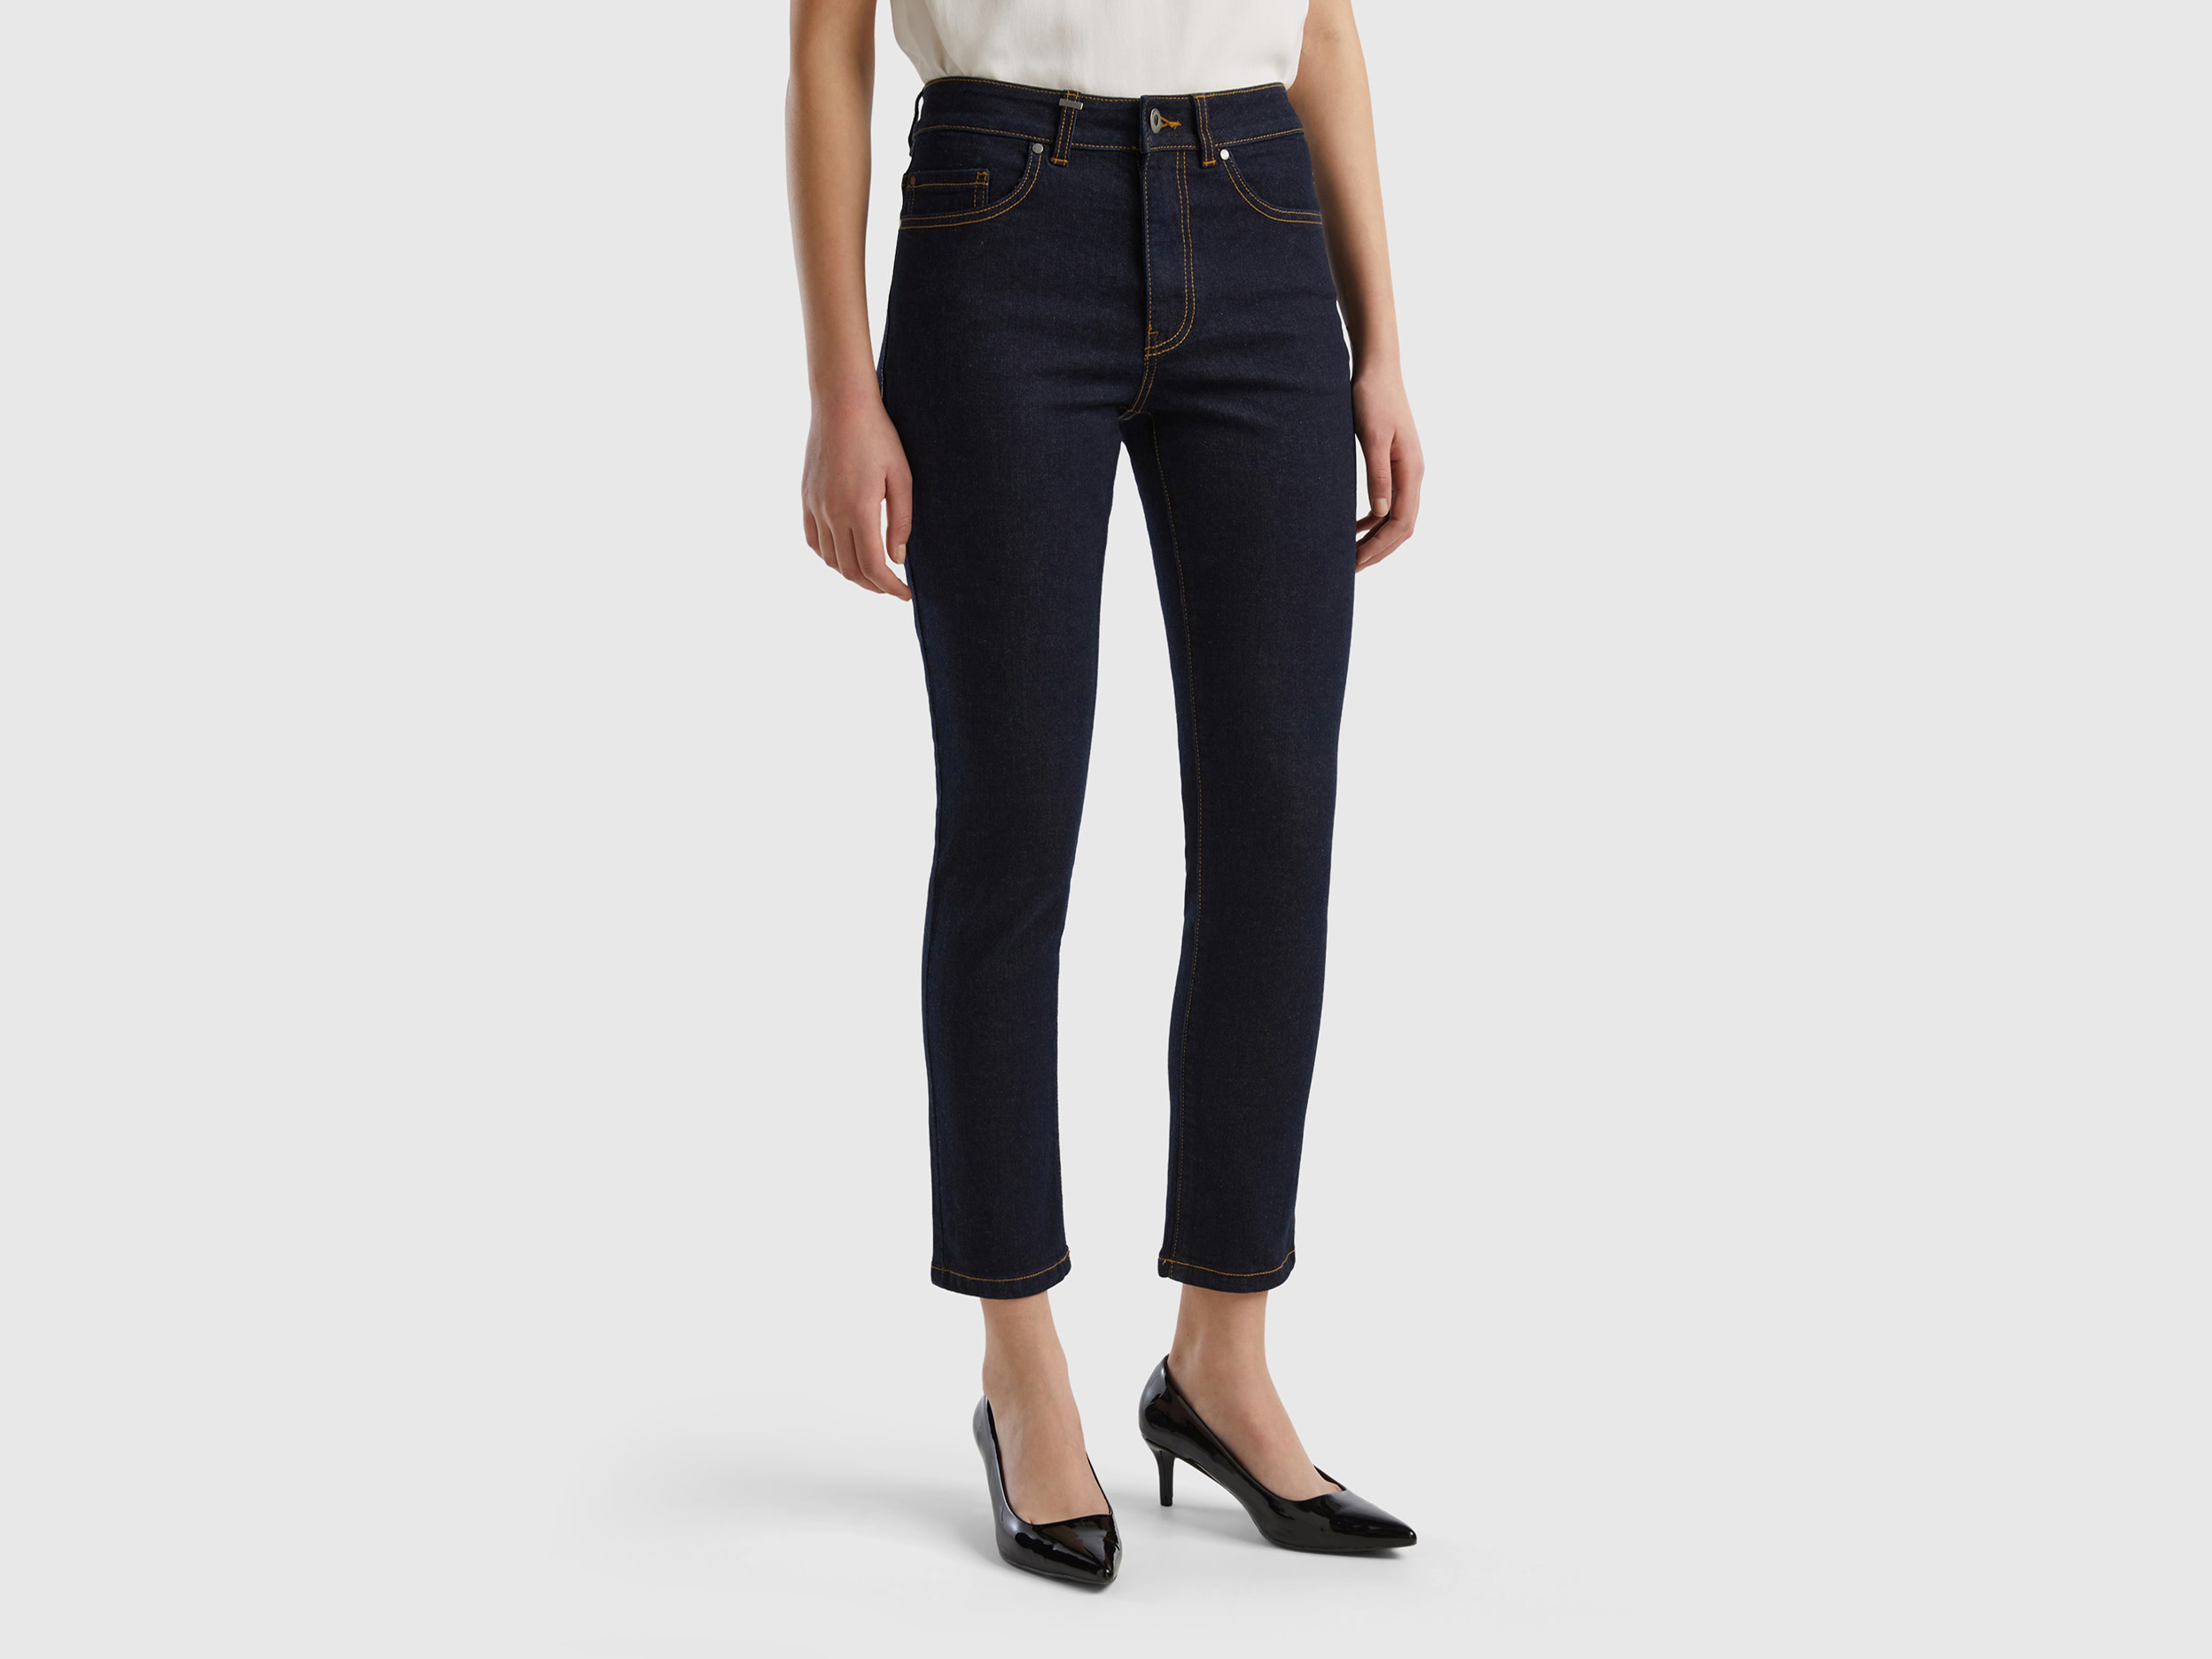 Image of Benetton, Slim Fit High-waisted Jeans, size 33, Dark Blue, Women